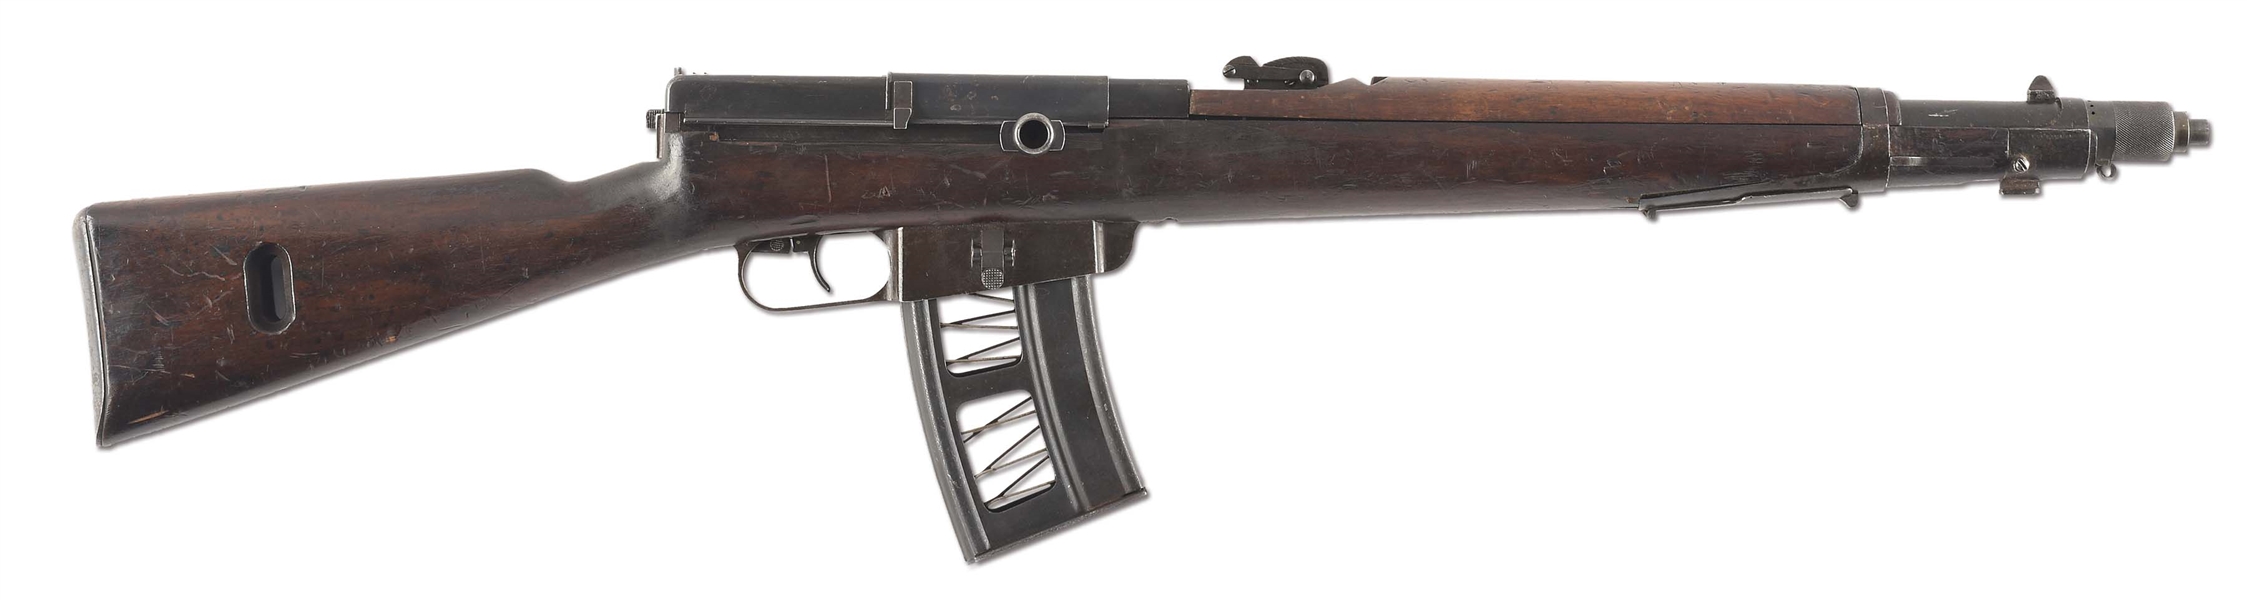 (N) EXTREMELY RARE BREDA COSTA RICAN MODEL PG MACHINE GUN USED FOR DEVELOPMENT OF THREE SHOT BURST FOR AMERICAN M16A2 (CURIO & RELIC).